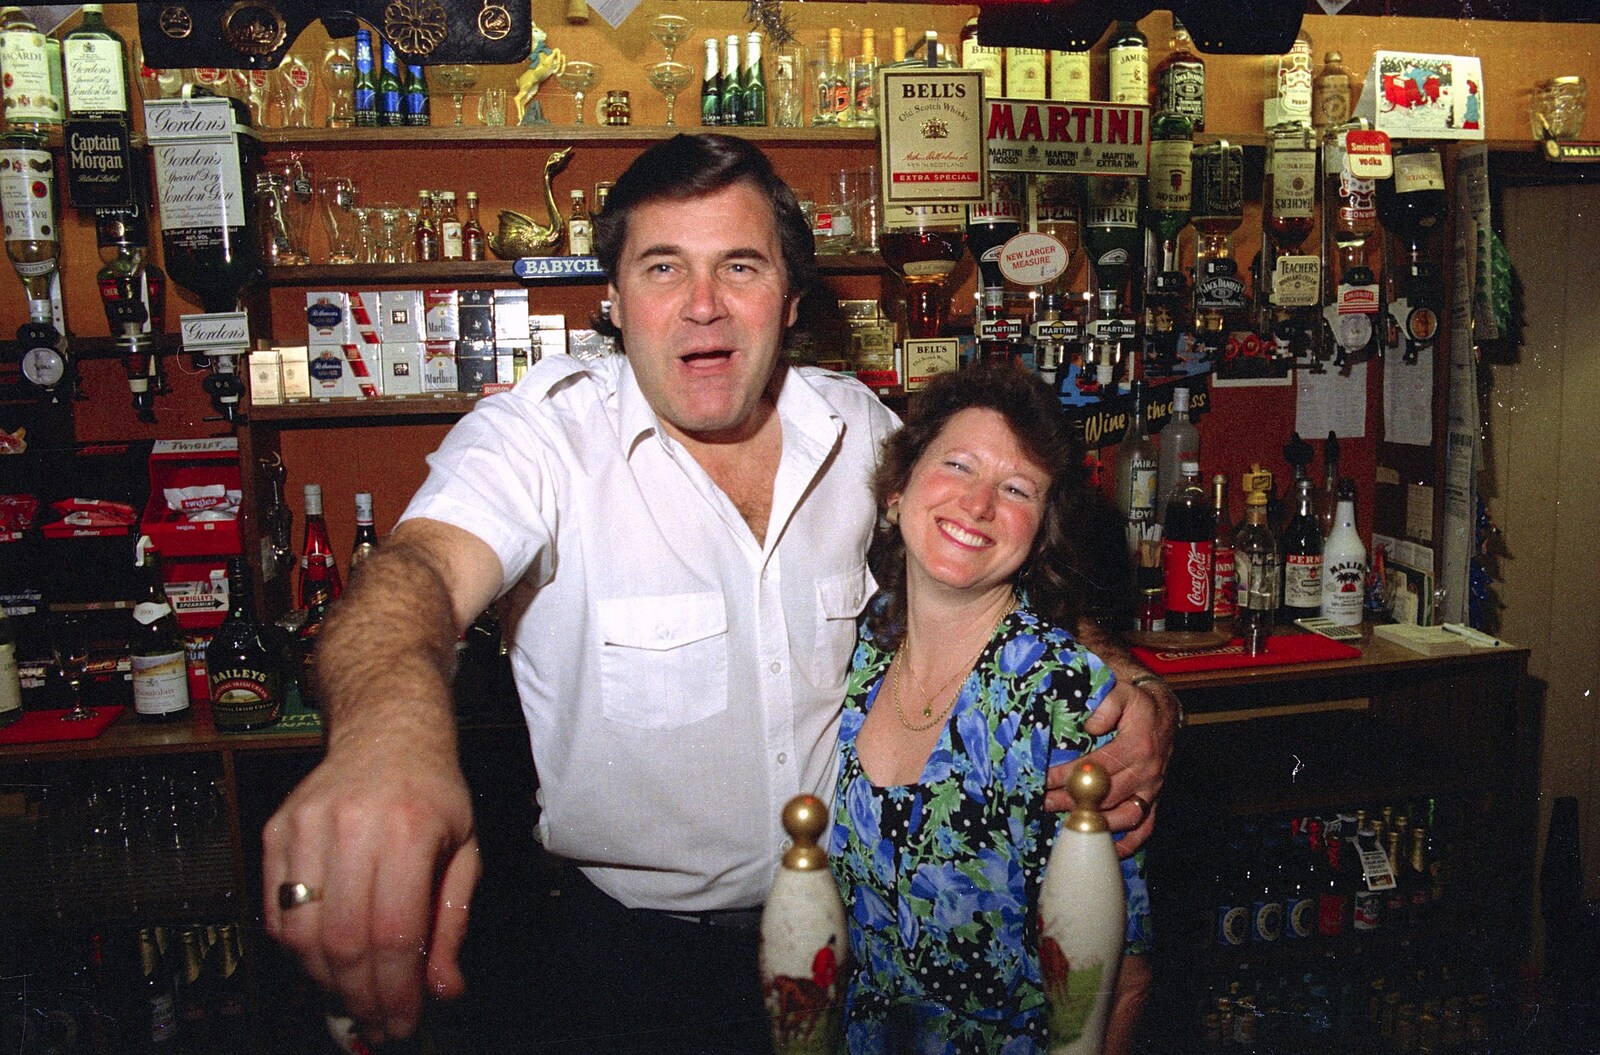 Alan and Sylvia from New Year's Eve at the Swan Inn, Brome, Suffolk - 31st December 1991